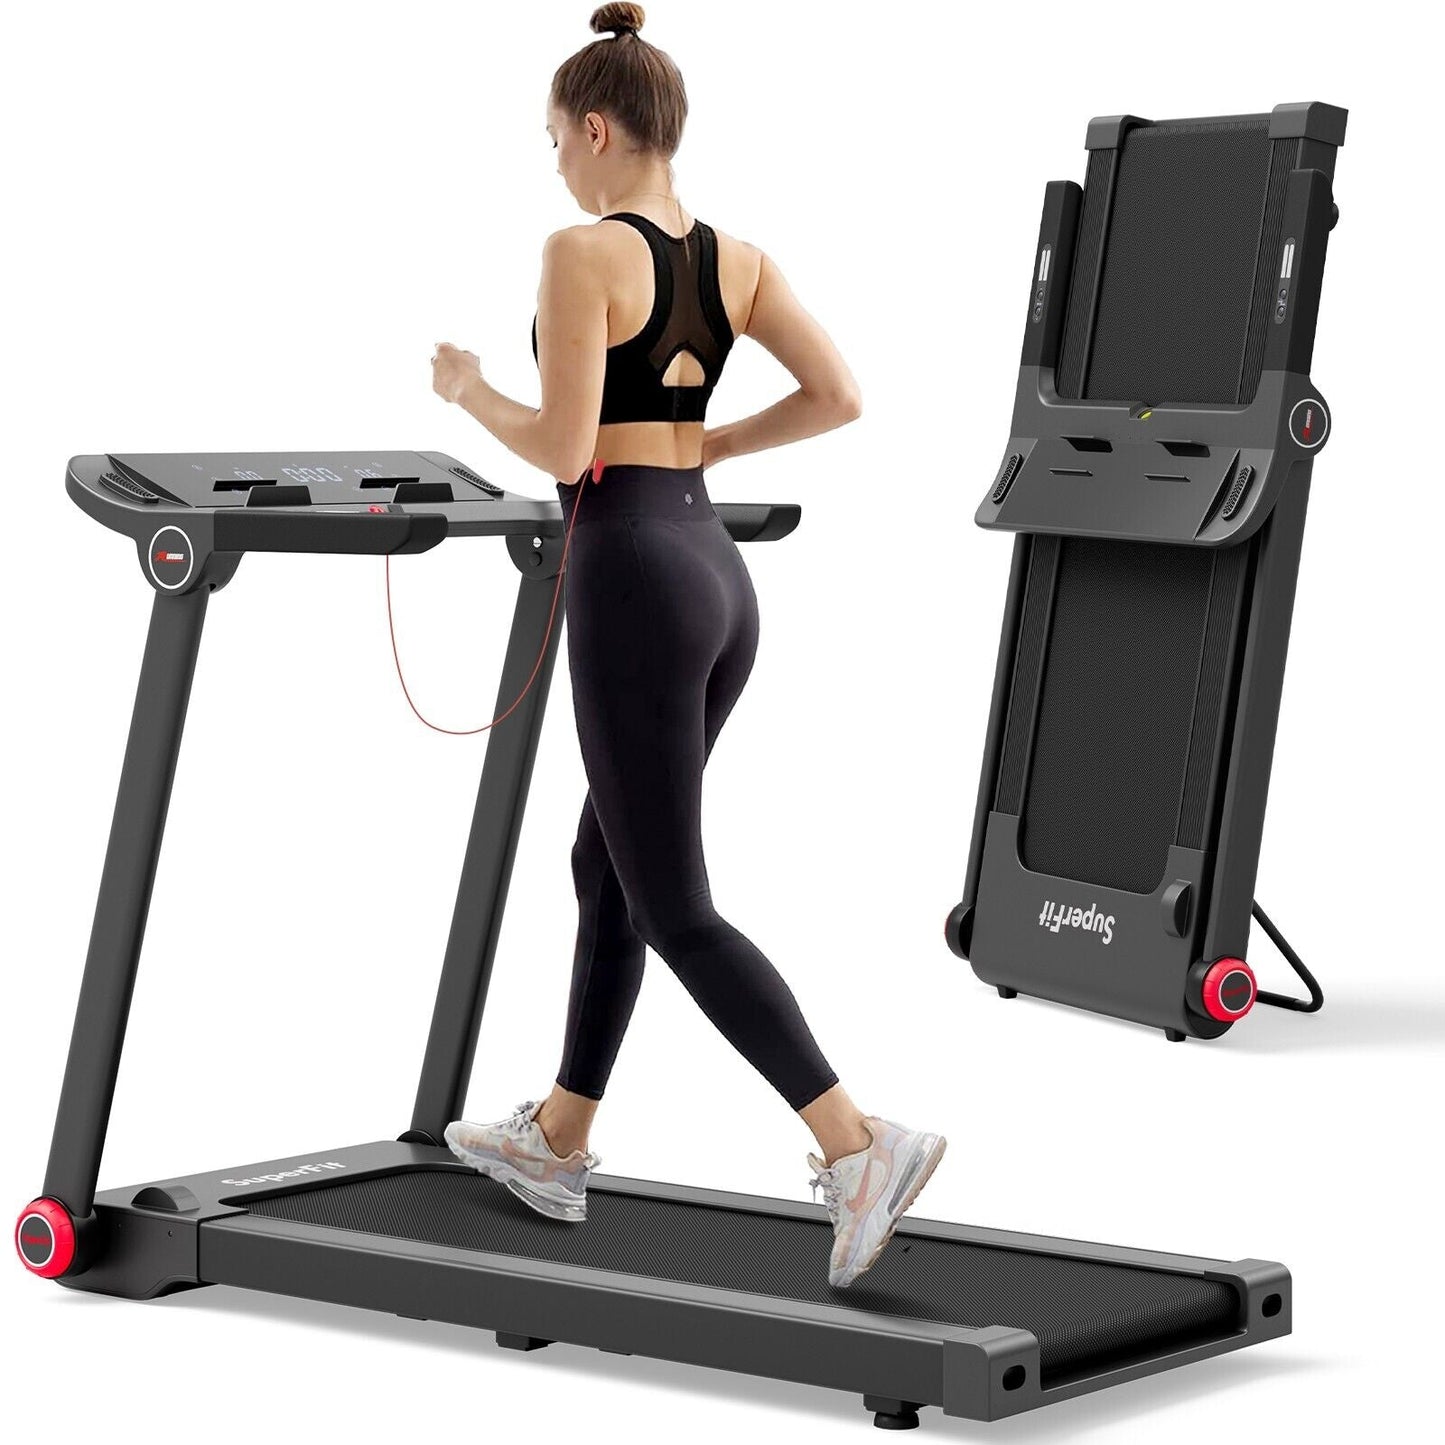 1.3HP Electric Folding Treadmill with 12 Programs - Furniture Gold